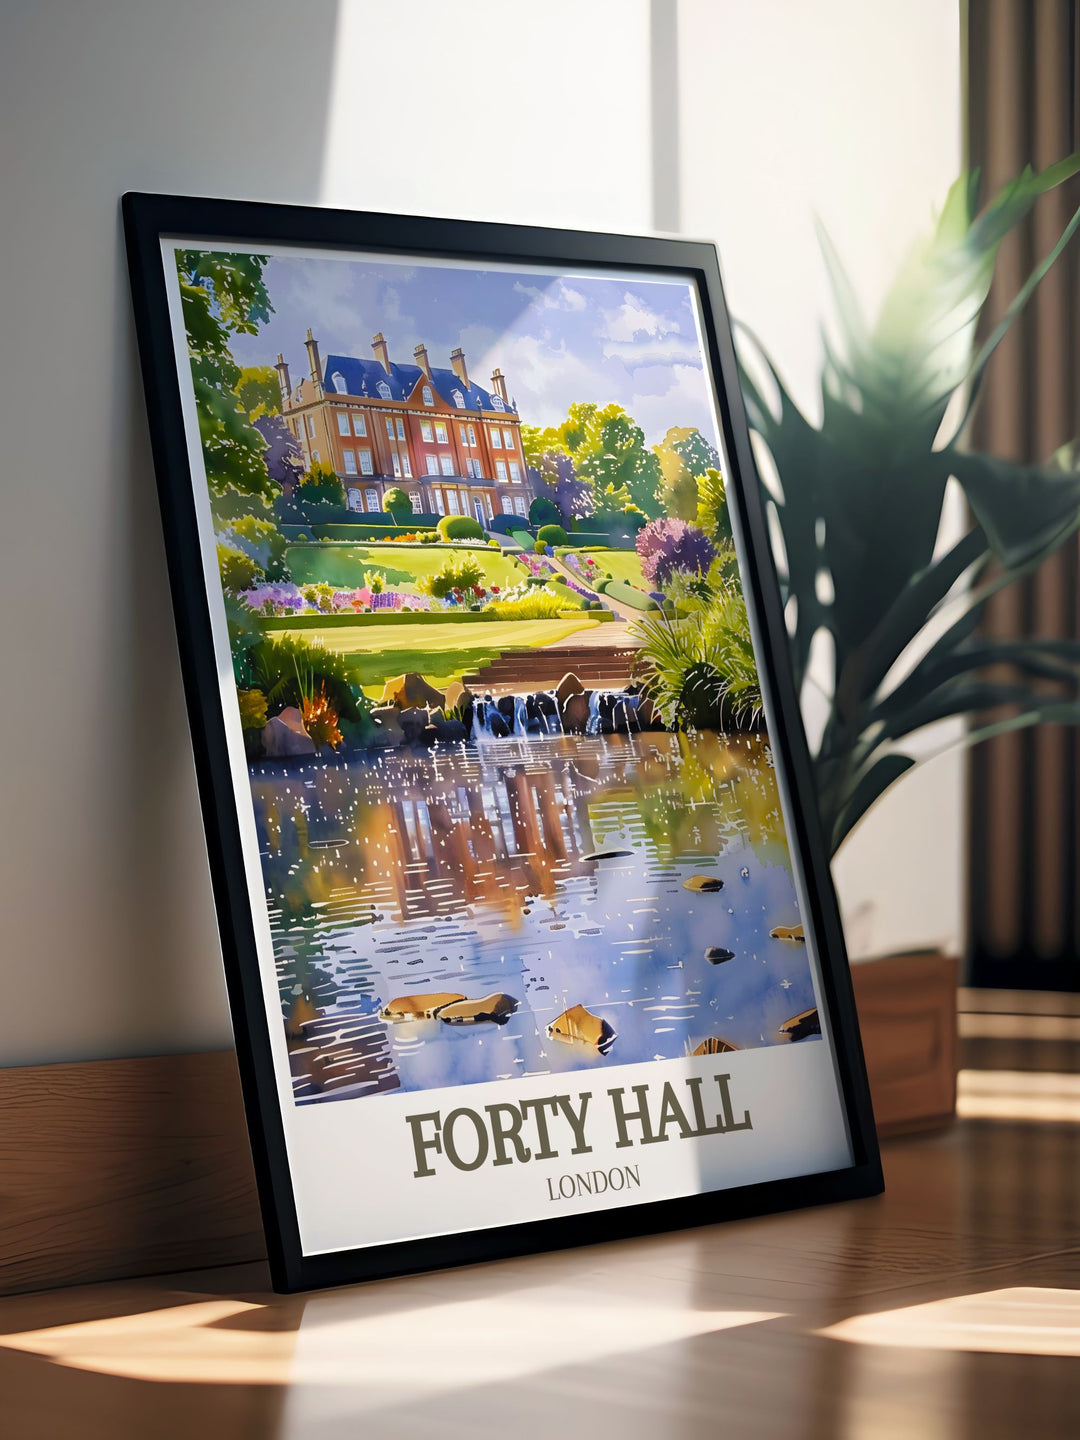 Forty Halls historic significance and Jacobean architecture are showcased in this print, highlighting its grandeur and timeless elegance.